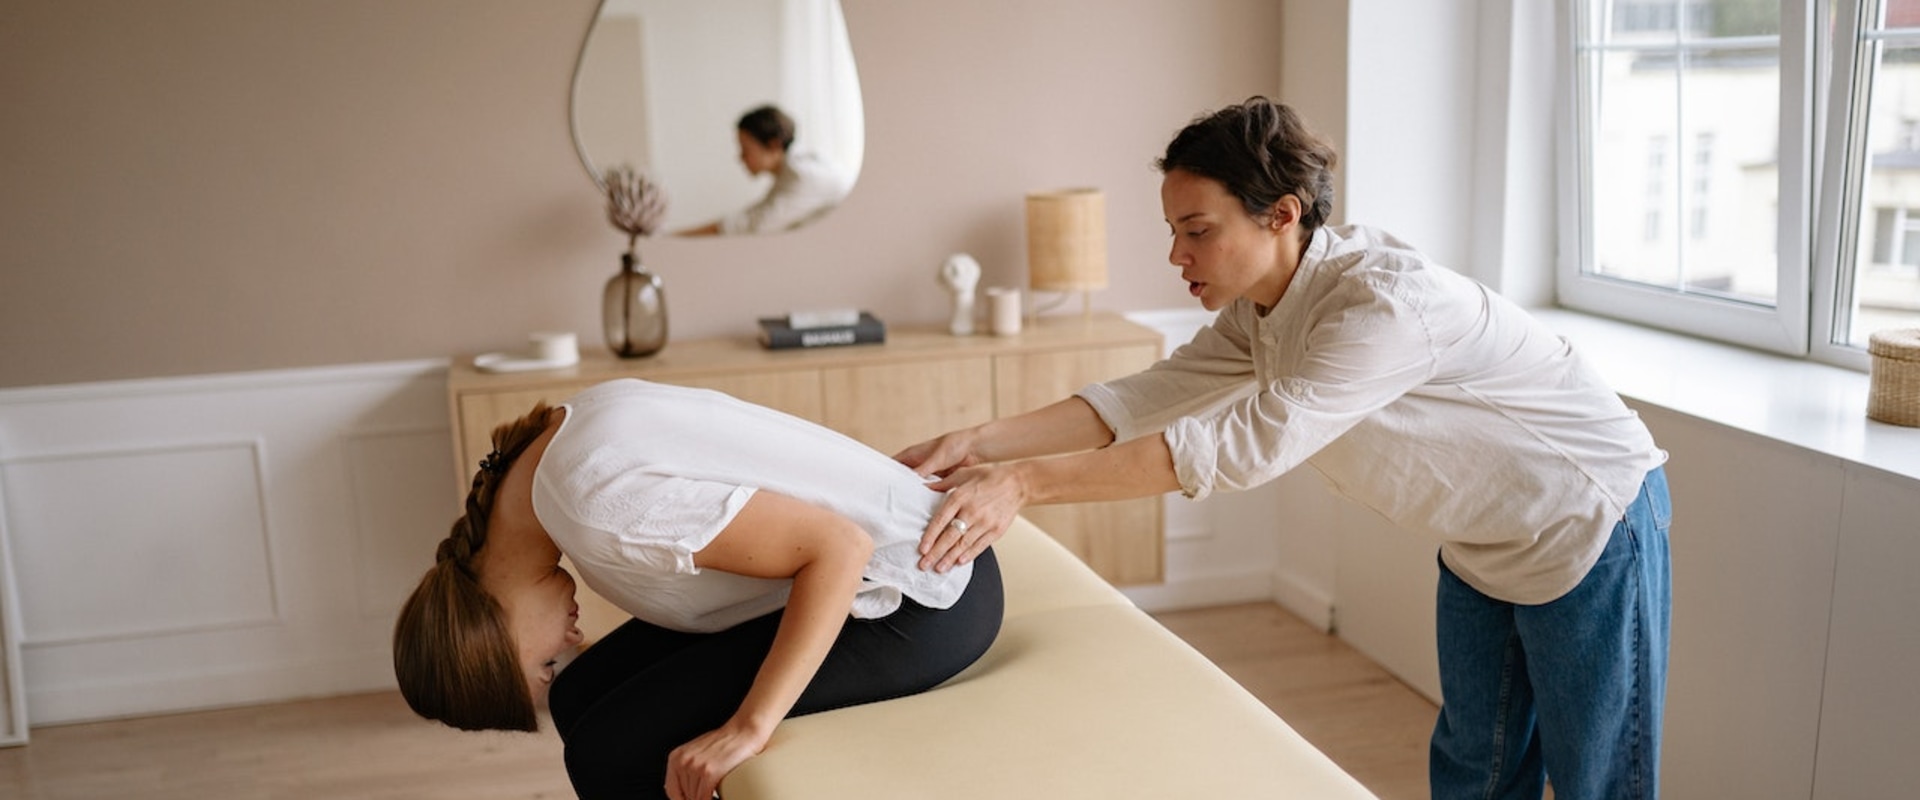 Achieve Wellness With Spinal Decompression Chiropractic Services In North York